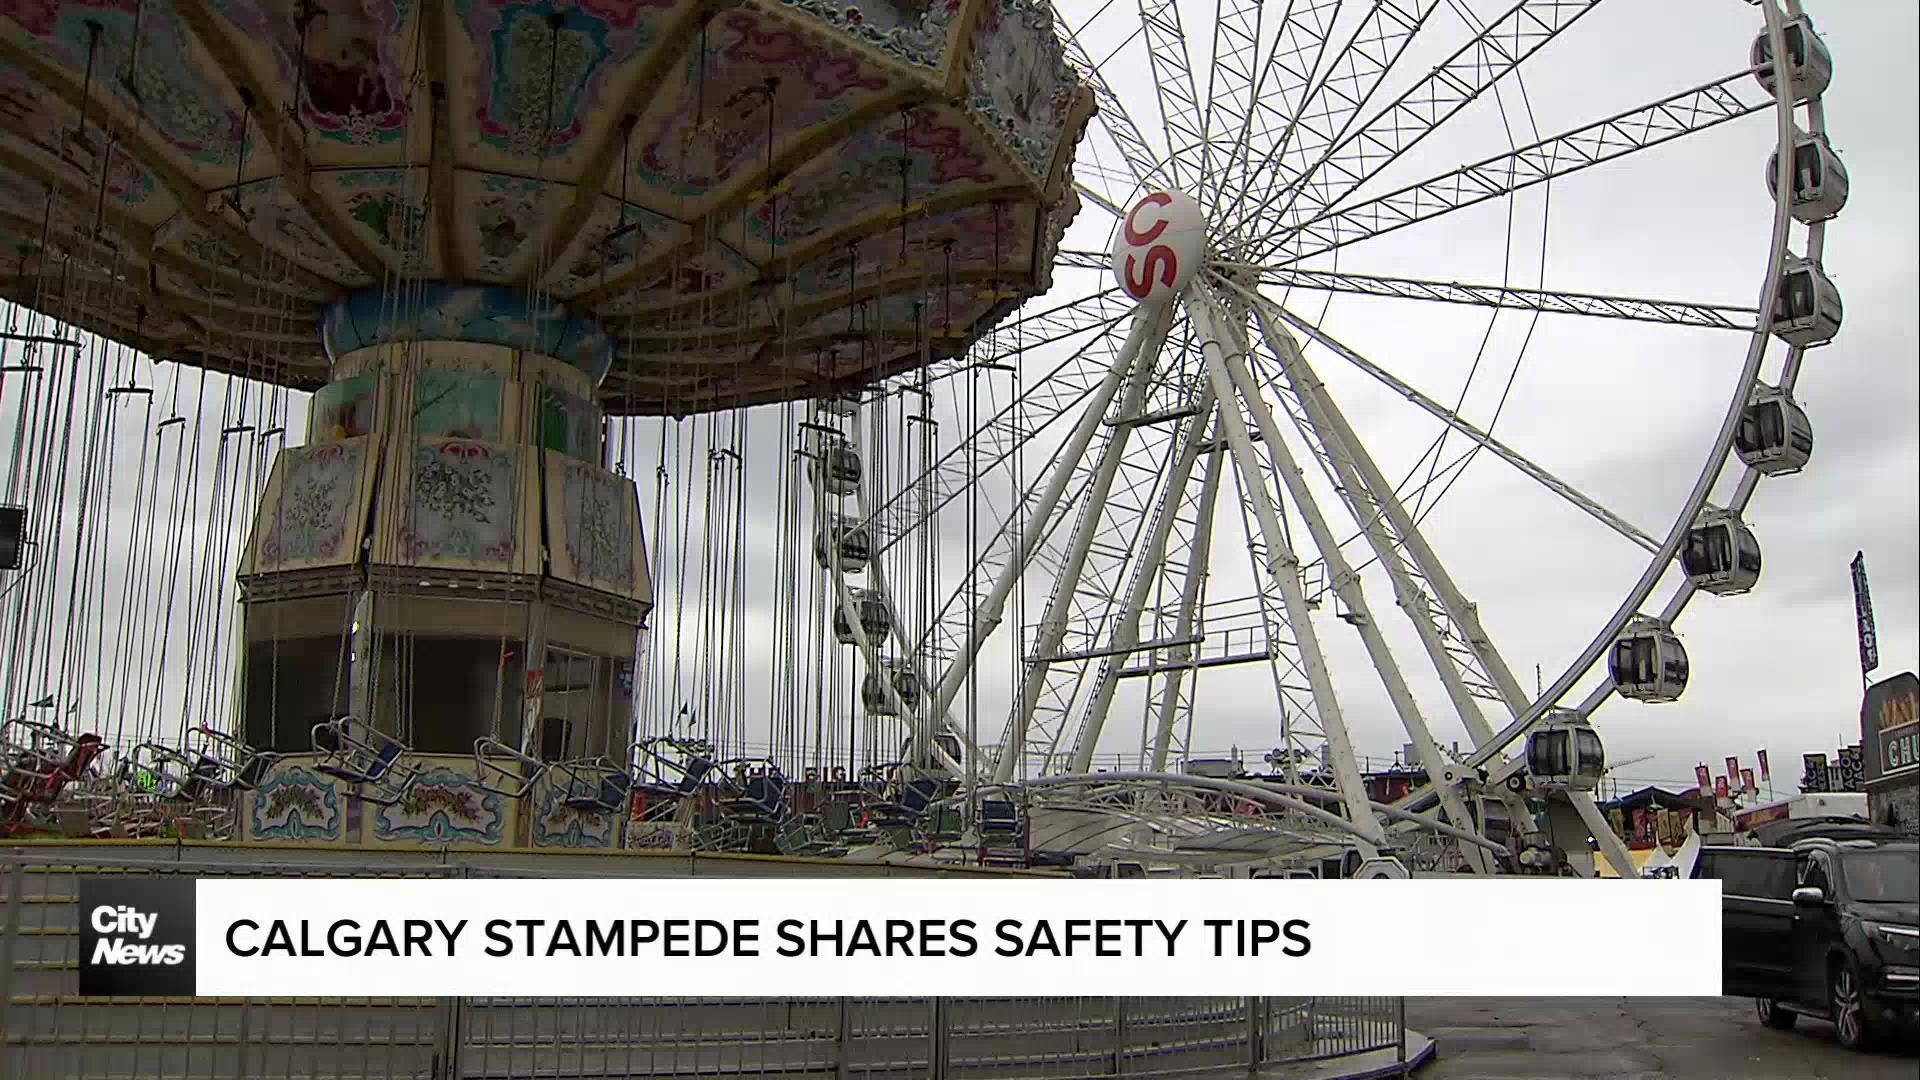 Calgary Stampede shares safety tips